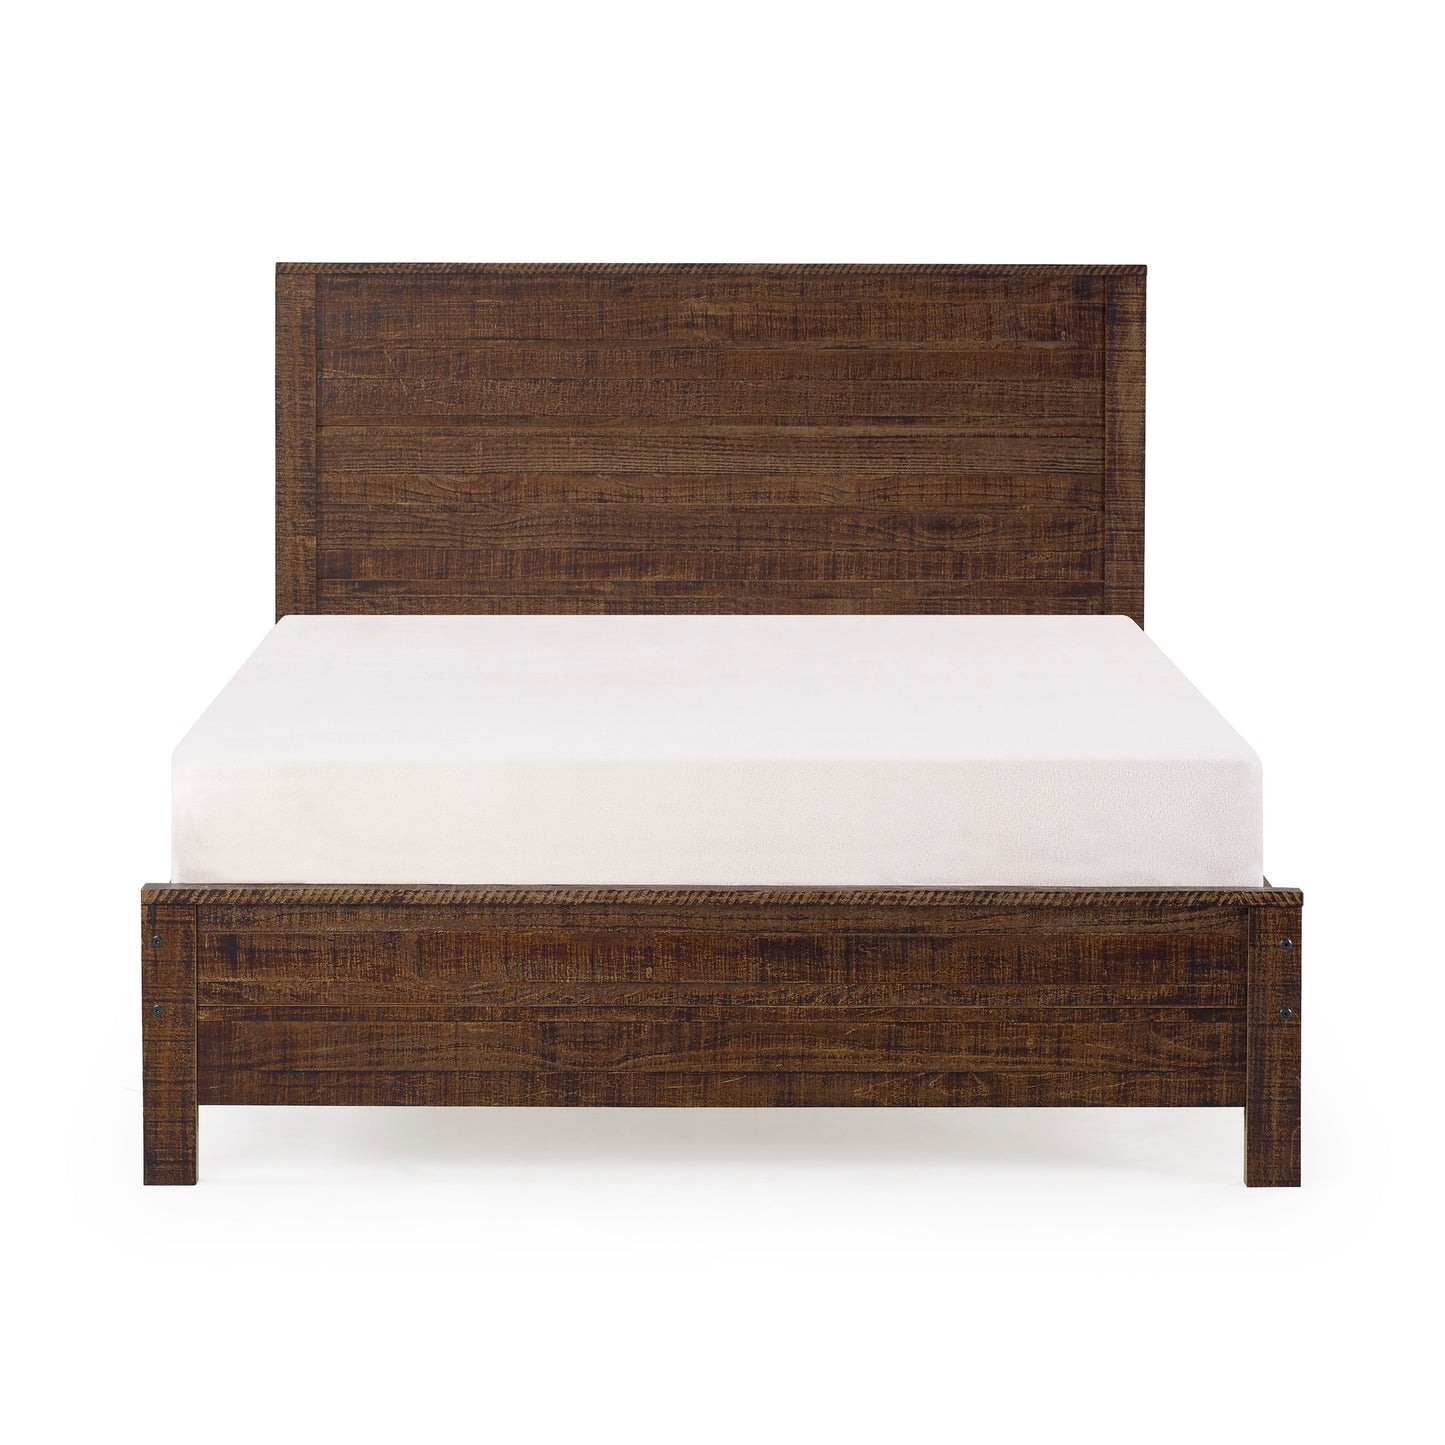 Albany Solid Wood Full Bed Frame with Headboard, Heavy Duty Modern Rustic Full Size Bed Frames, Box Spring Needed